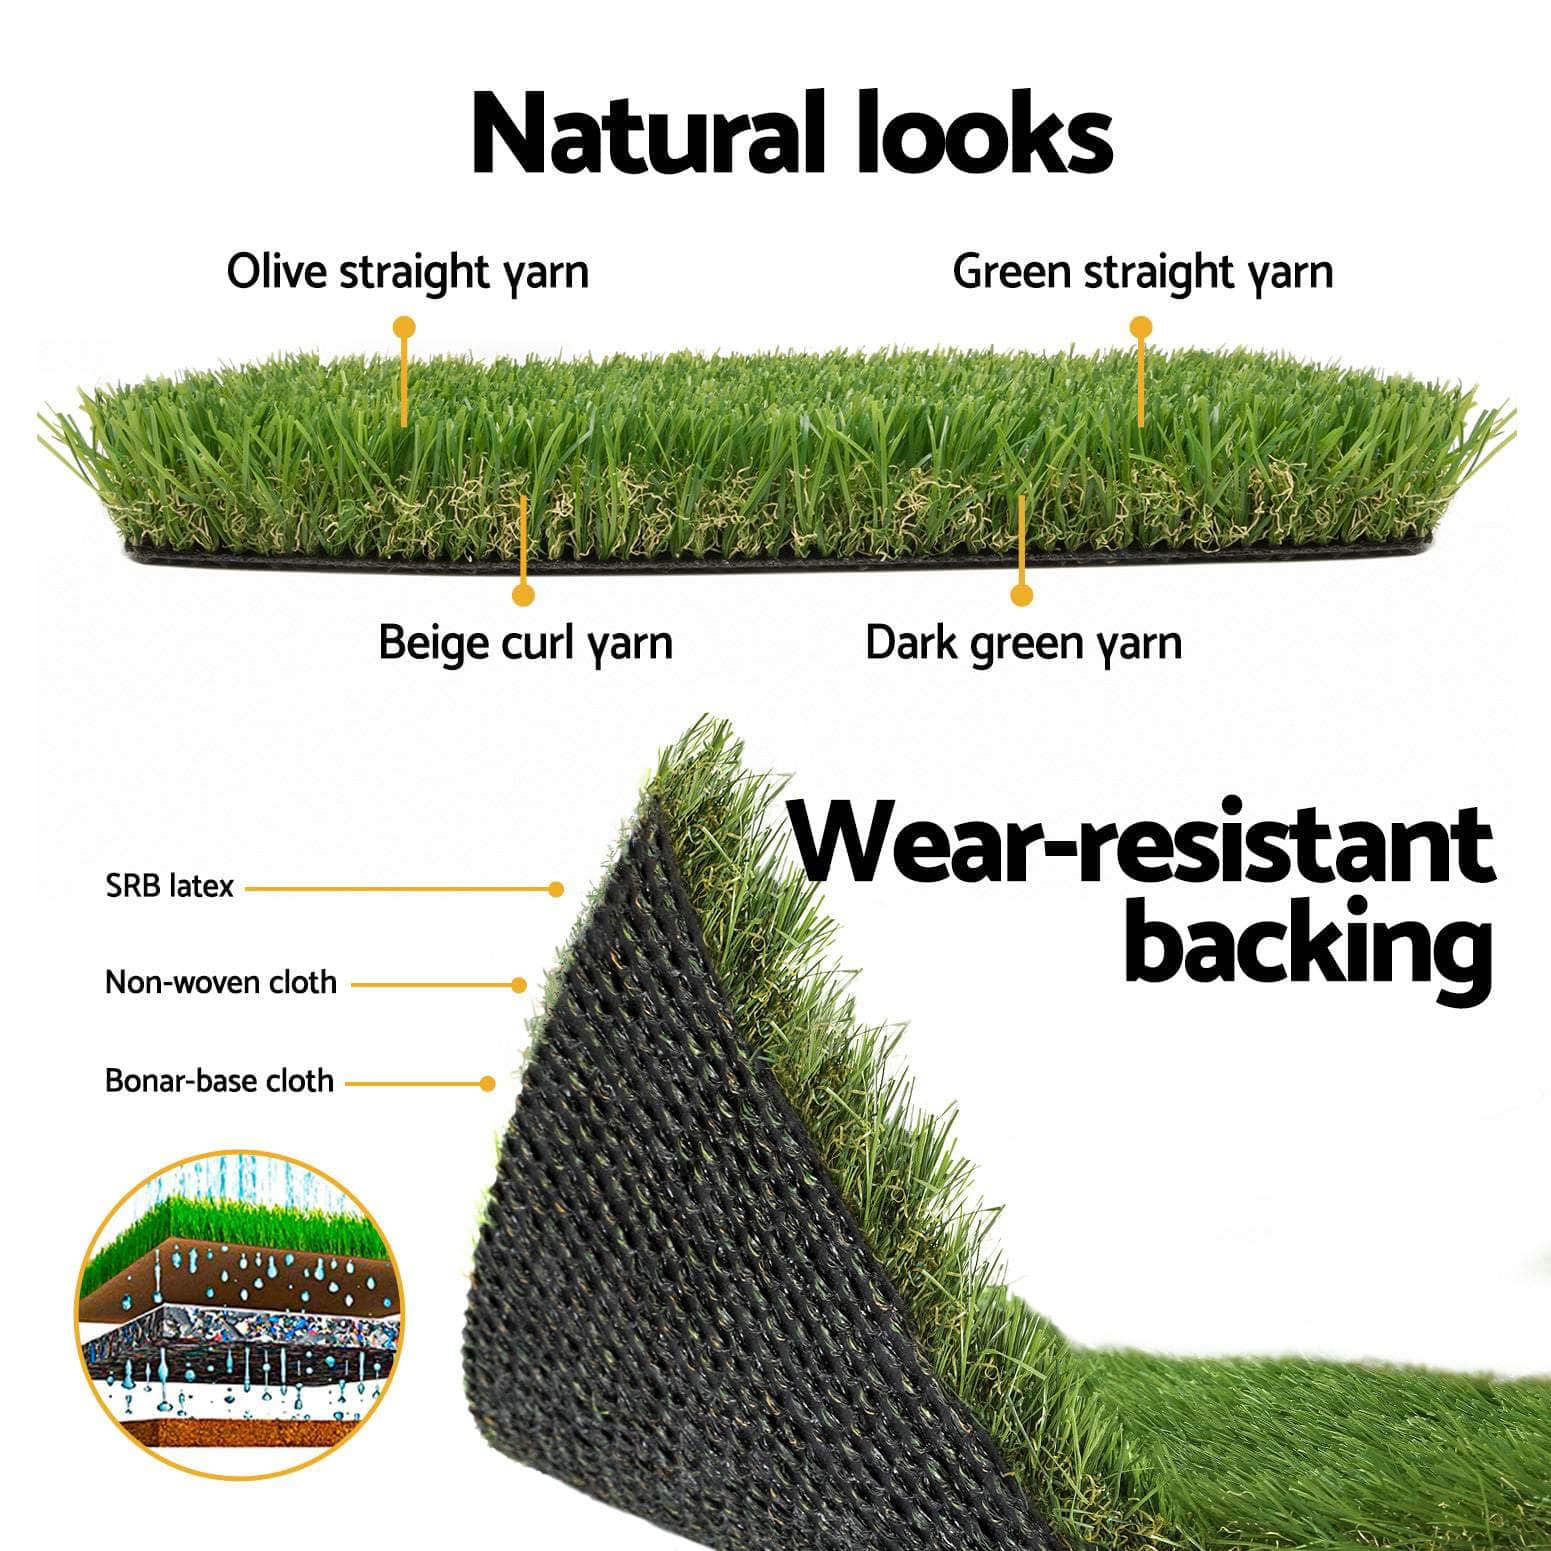 Artificial Grass 30Mm 2Mx5M Synthetic Fake Lawn Turf Plastic Plant